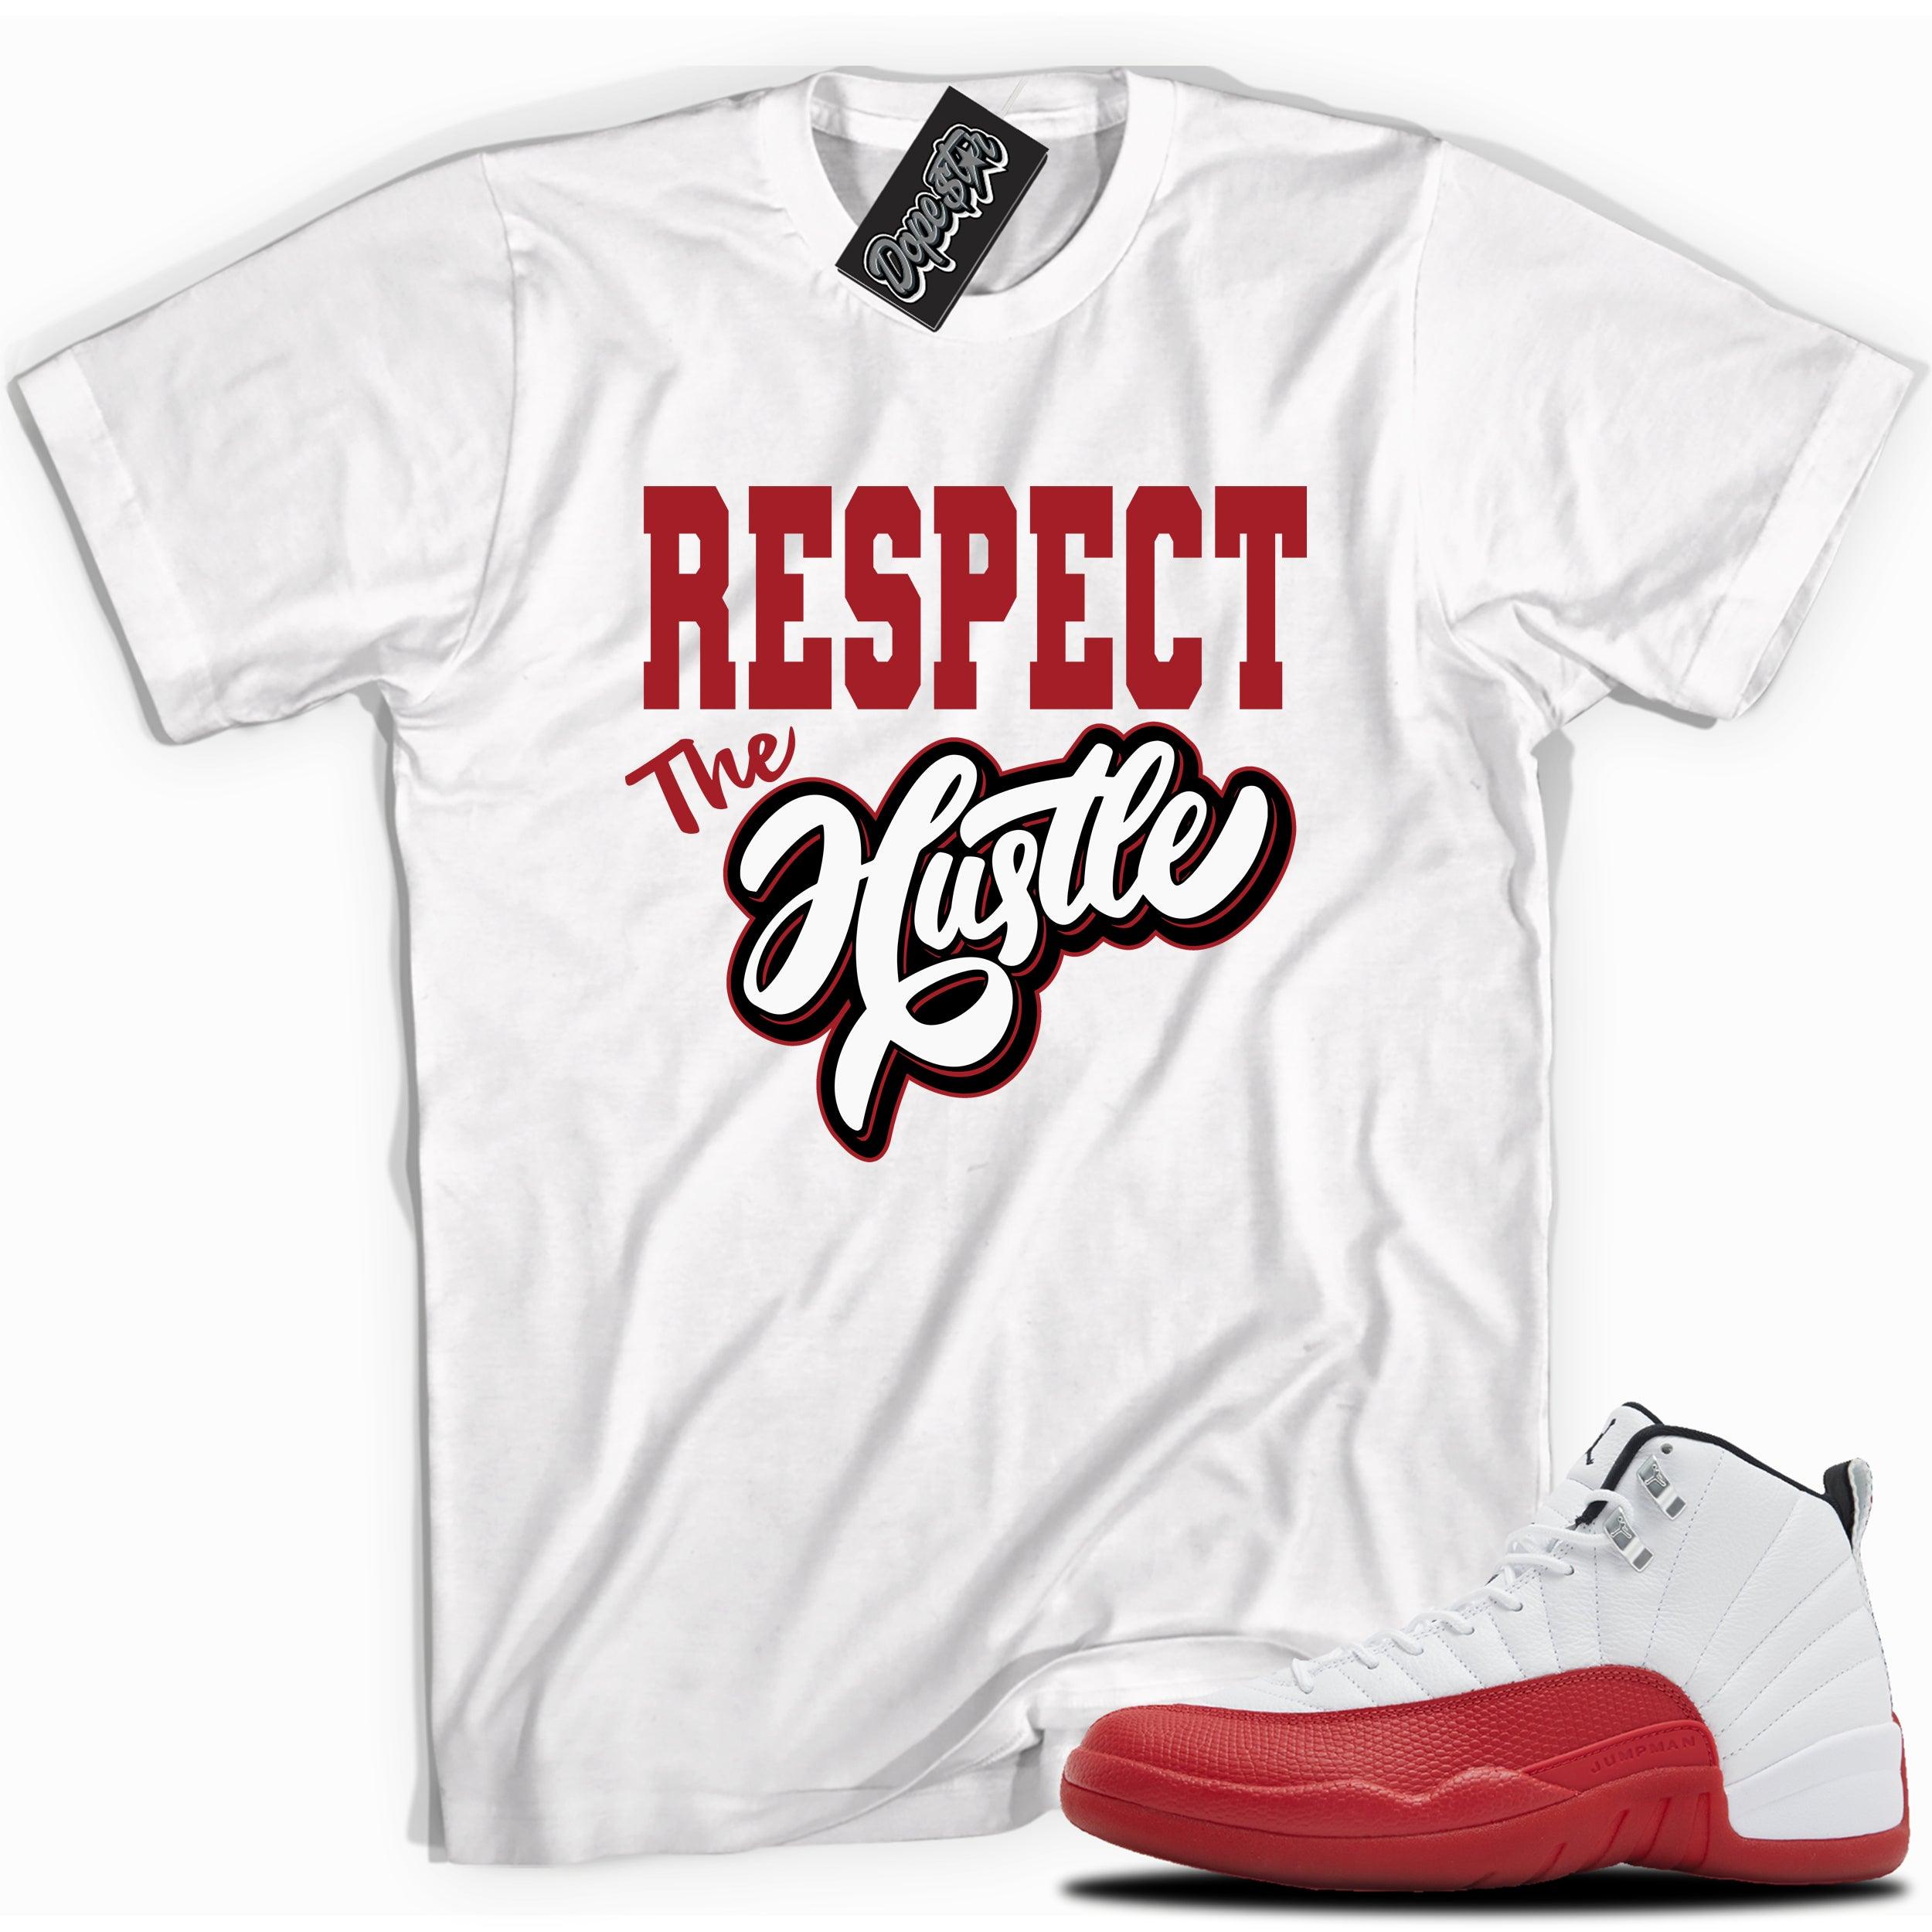 Cool White graphic tee with “Respect The Hustle” print, that perfectly matches Air Jordan 12 Retro Cherry Red 2023 red and white sneakers